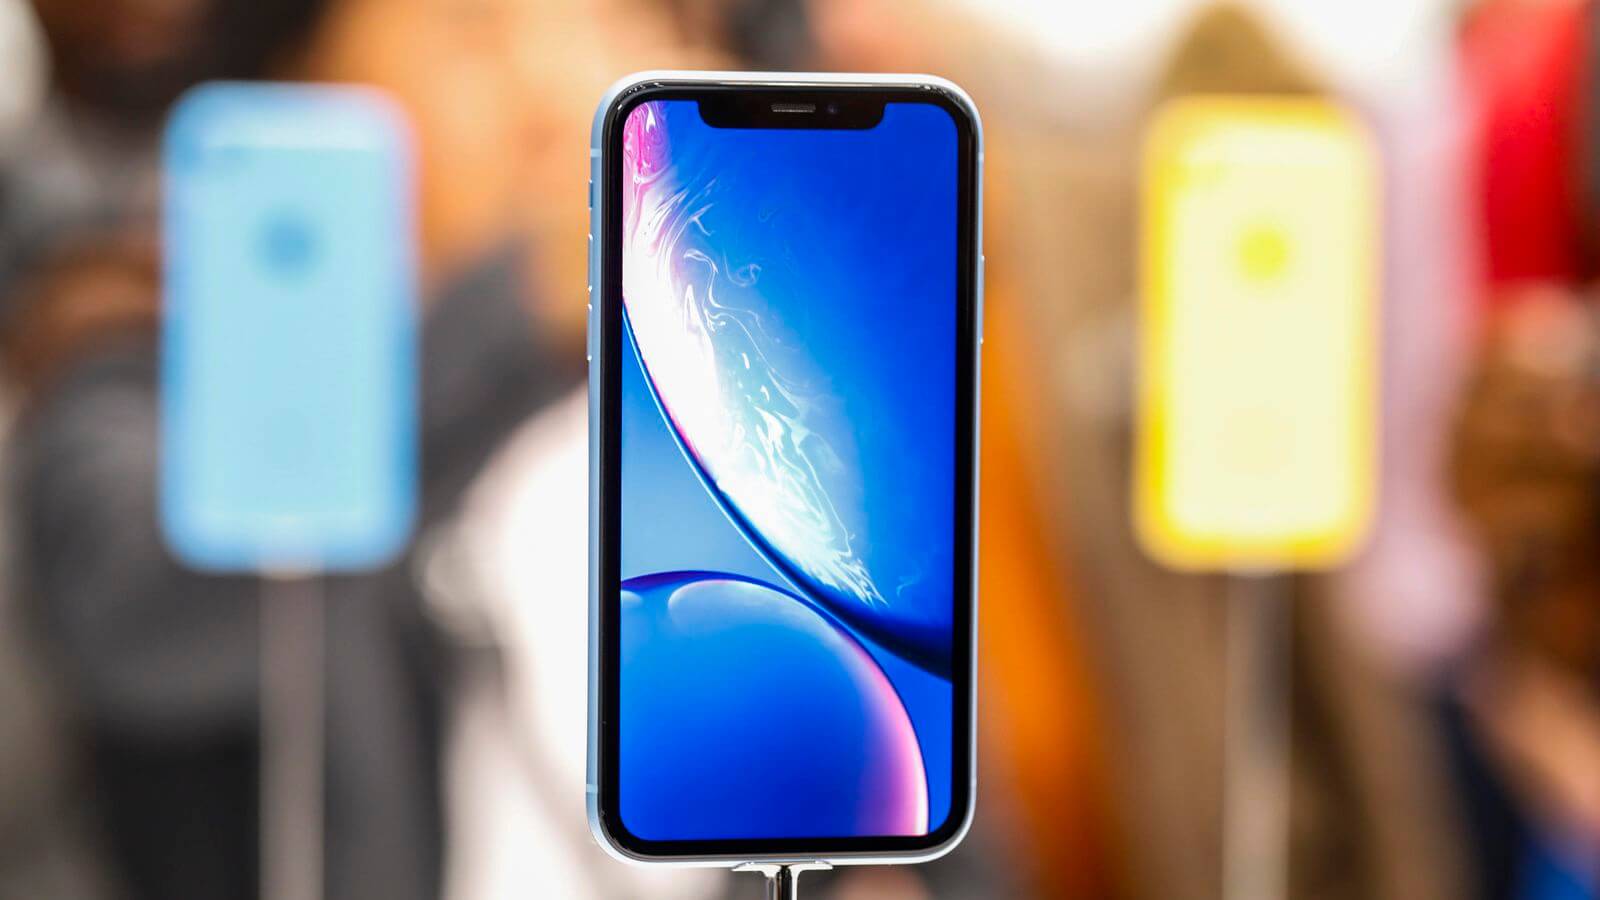 Iphone Xs Xs Max Xr Specs Battery Size Ram Details Revealed In